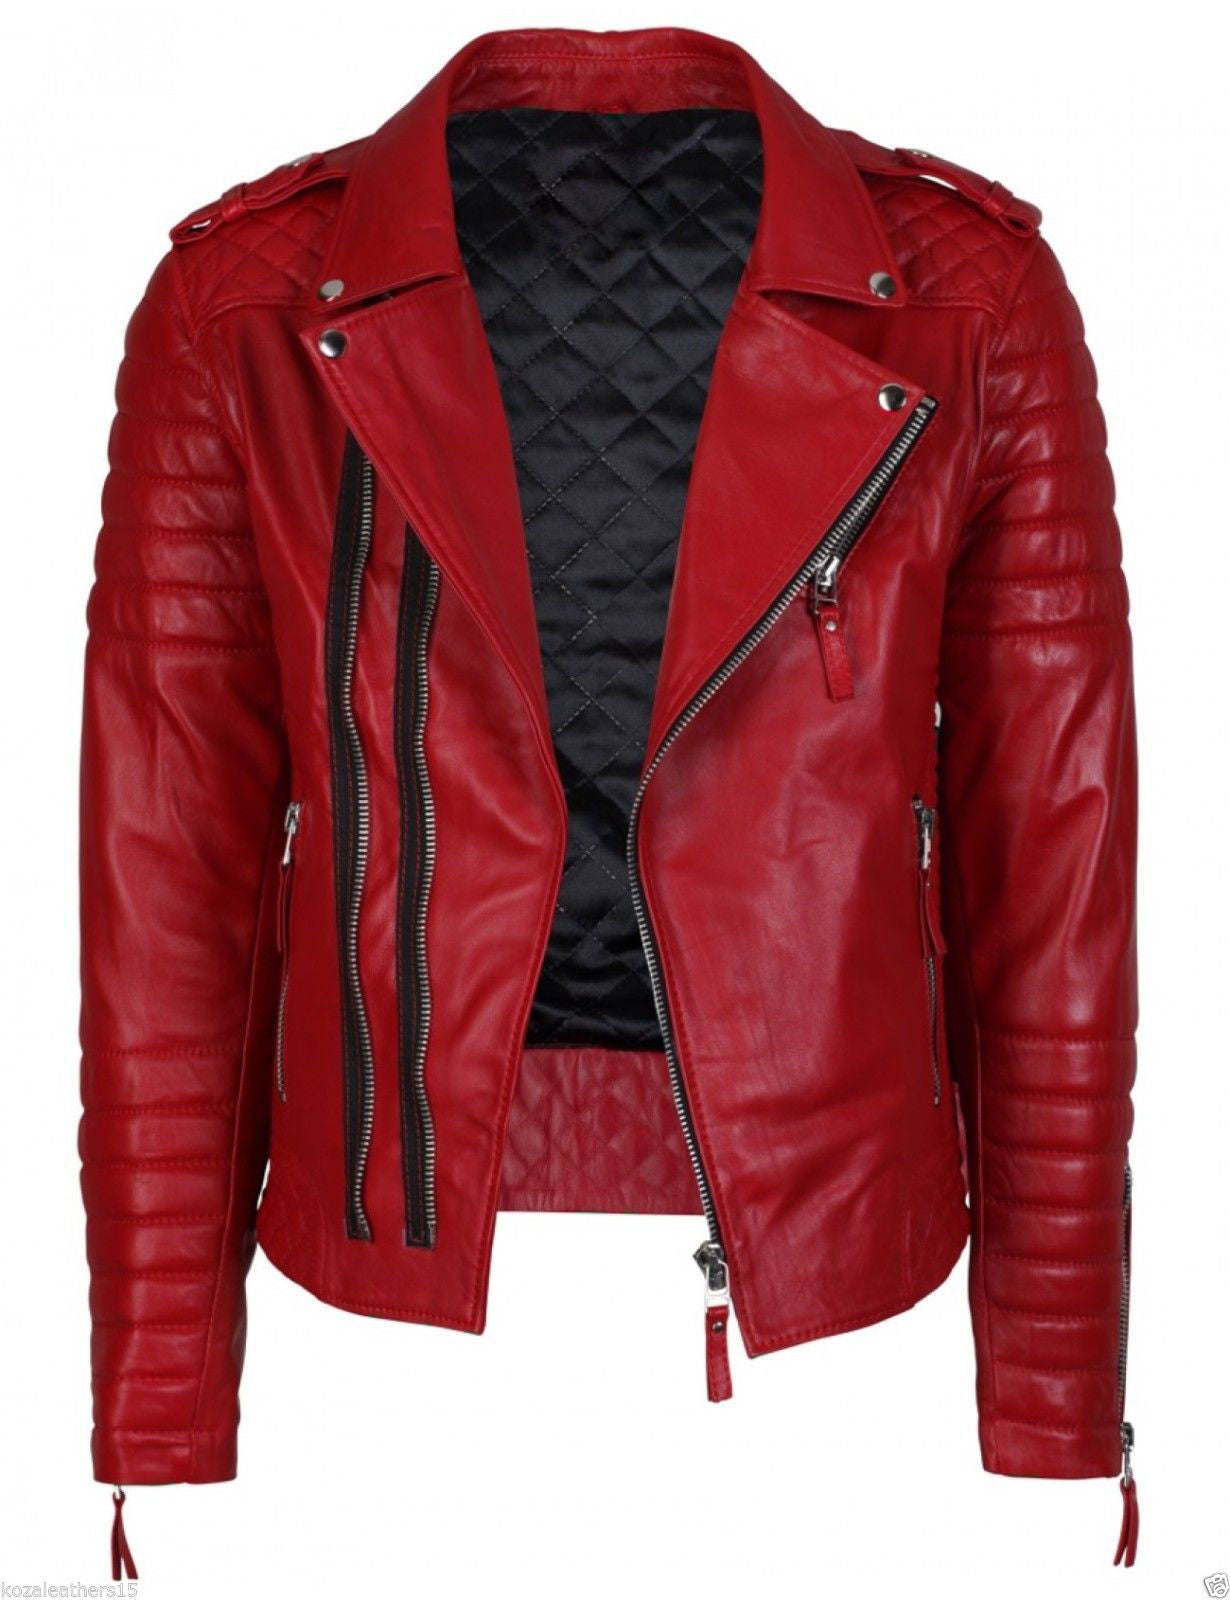 Red Leather Biker - The Film Jackets